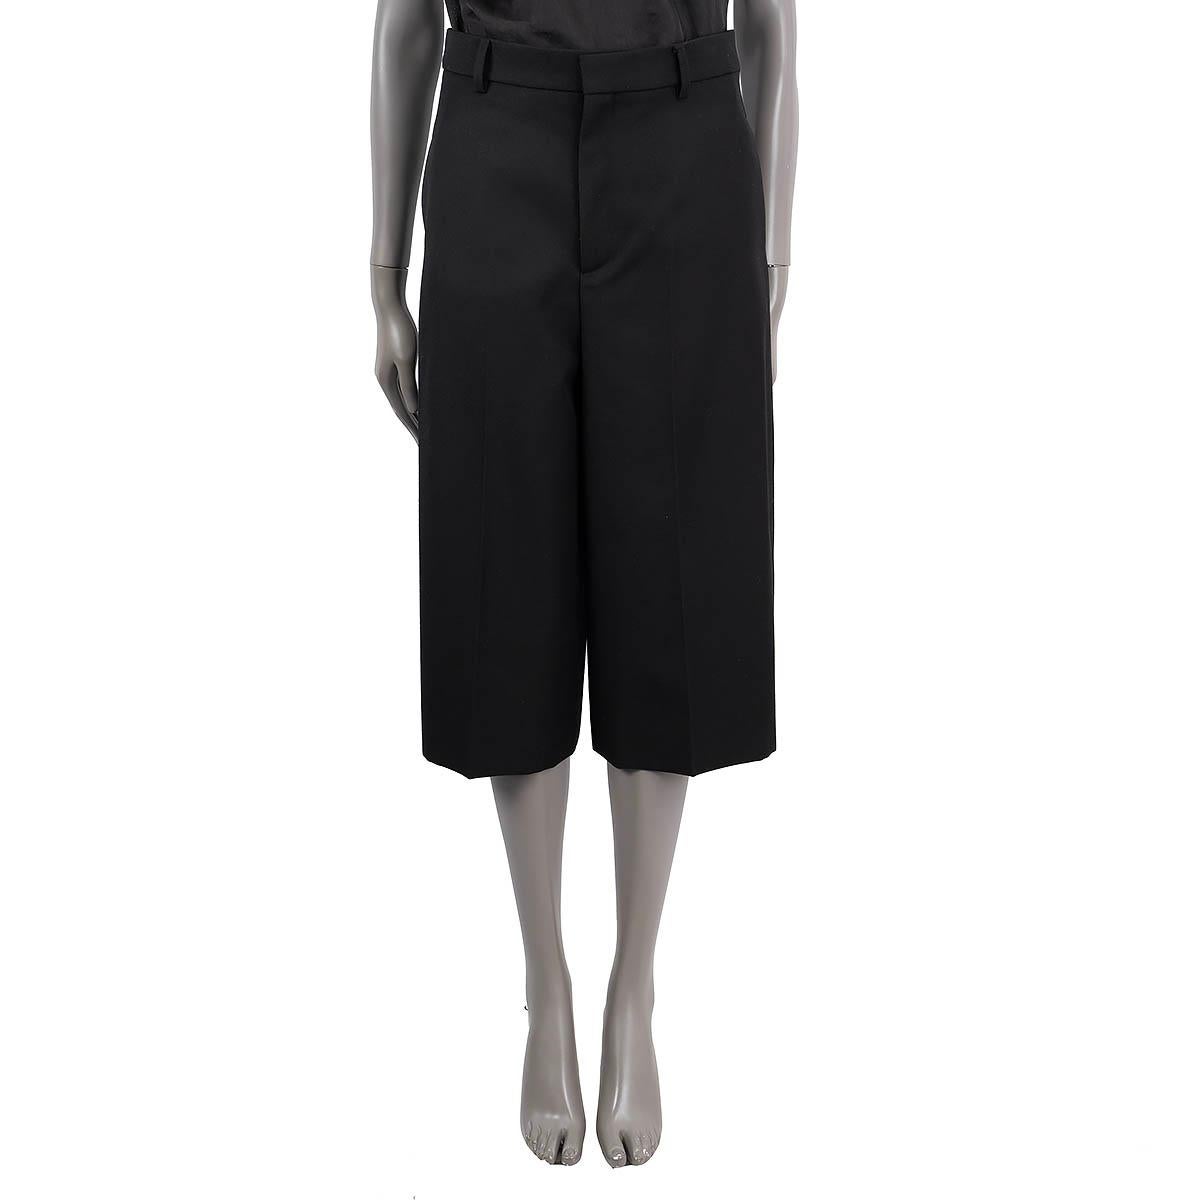 100% authentic Celine culotte pants in black polyester (55%) and wool (45%). Feature wide legs, two slit pocket on the sides, two buttoned pockets on the back and belt loops. Unlined. Have been worn and are in excellent condition.

2020